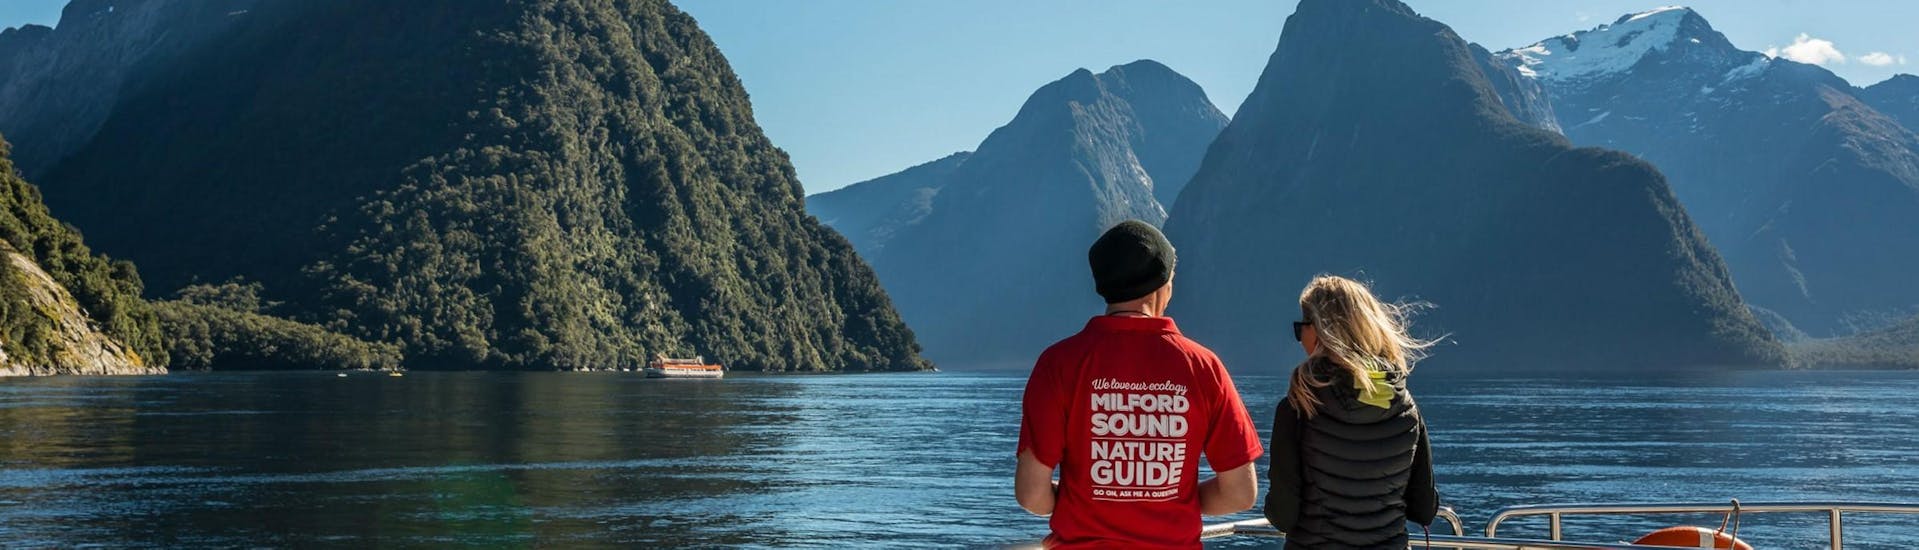 A nature guide and a passenger are observing the spectacular surroundings from the viewing deck during the Nature Cruise in Milford Sound by Southern Discoveries.